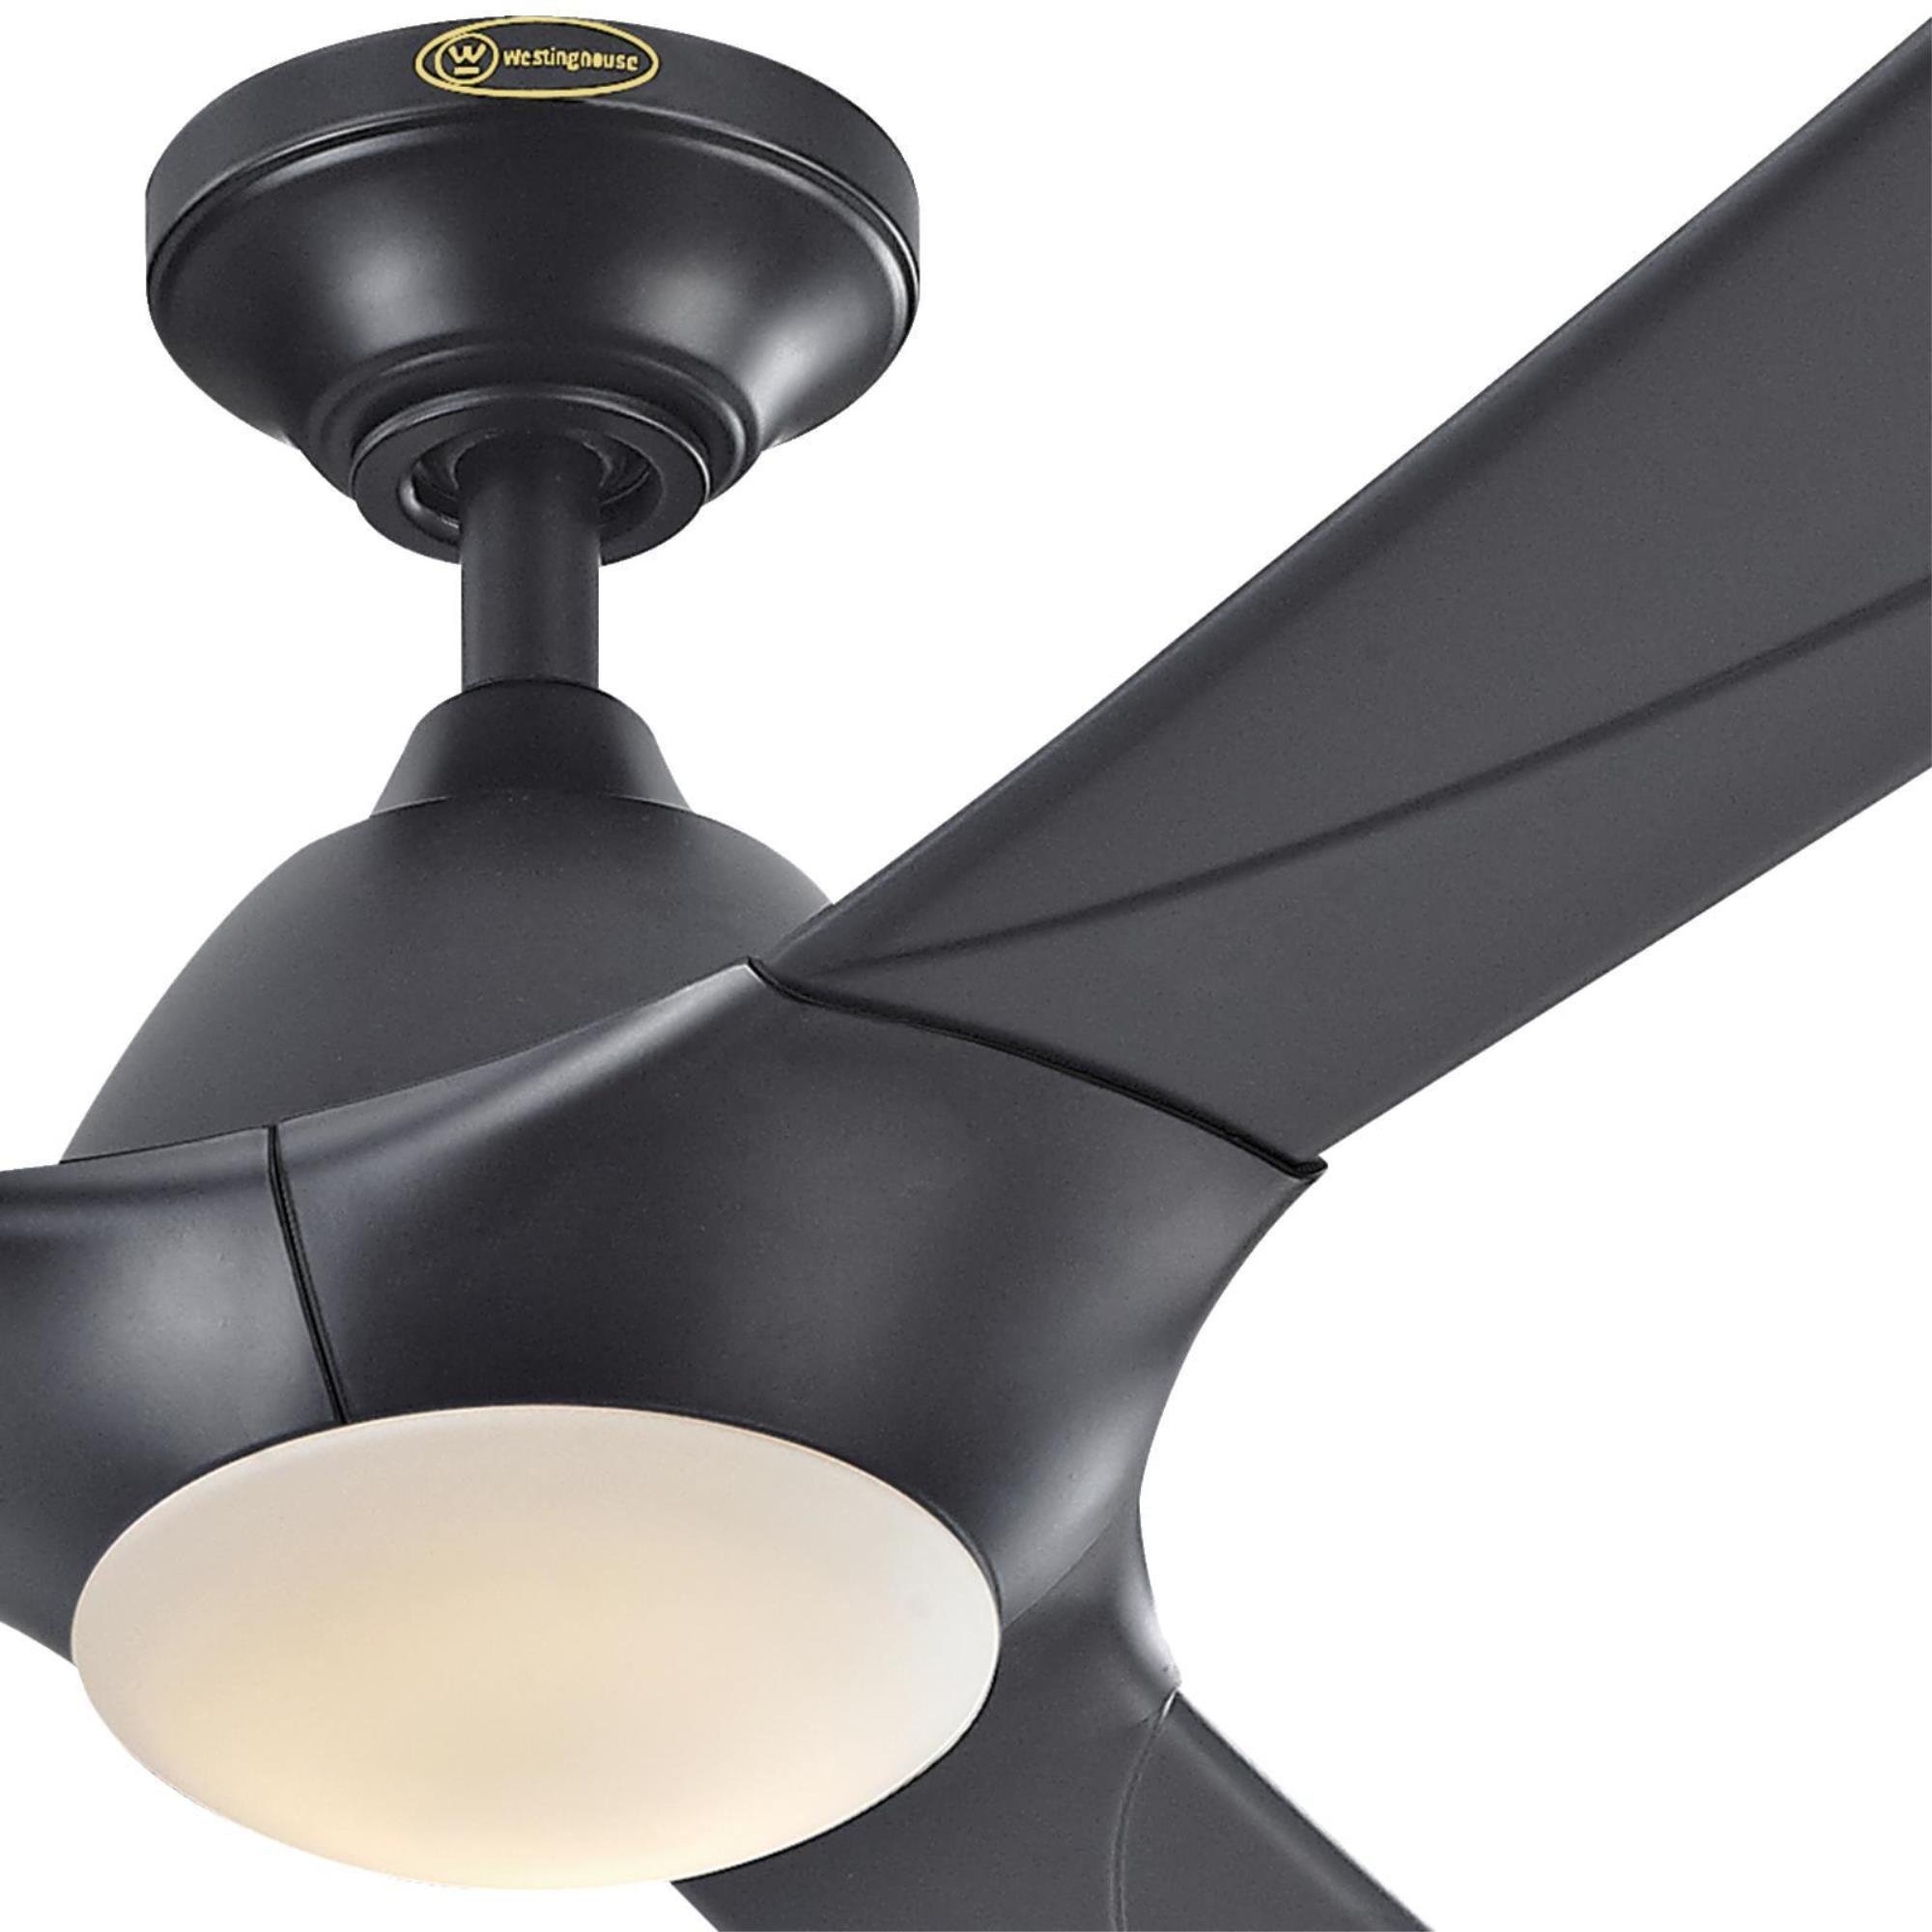 Westinghouse Lighting 7204200 Techno II 72-inch Black Indoor DC Motor Ceiling Fan, Dimmable LED Light Kit with Opal Frosted Glass,